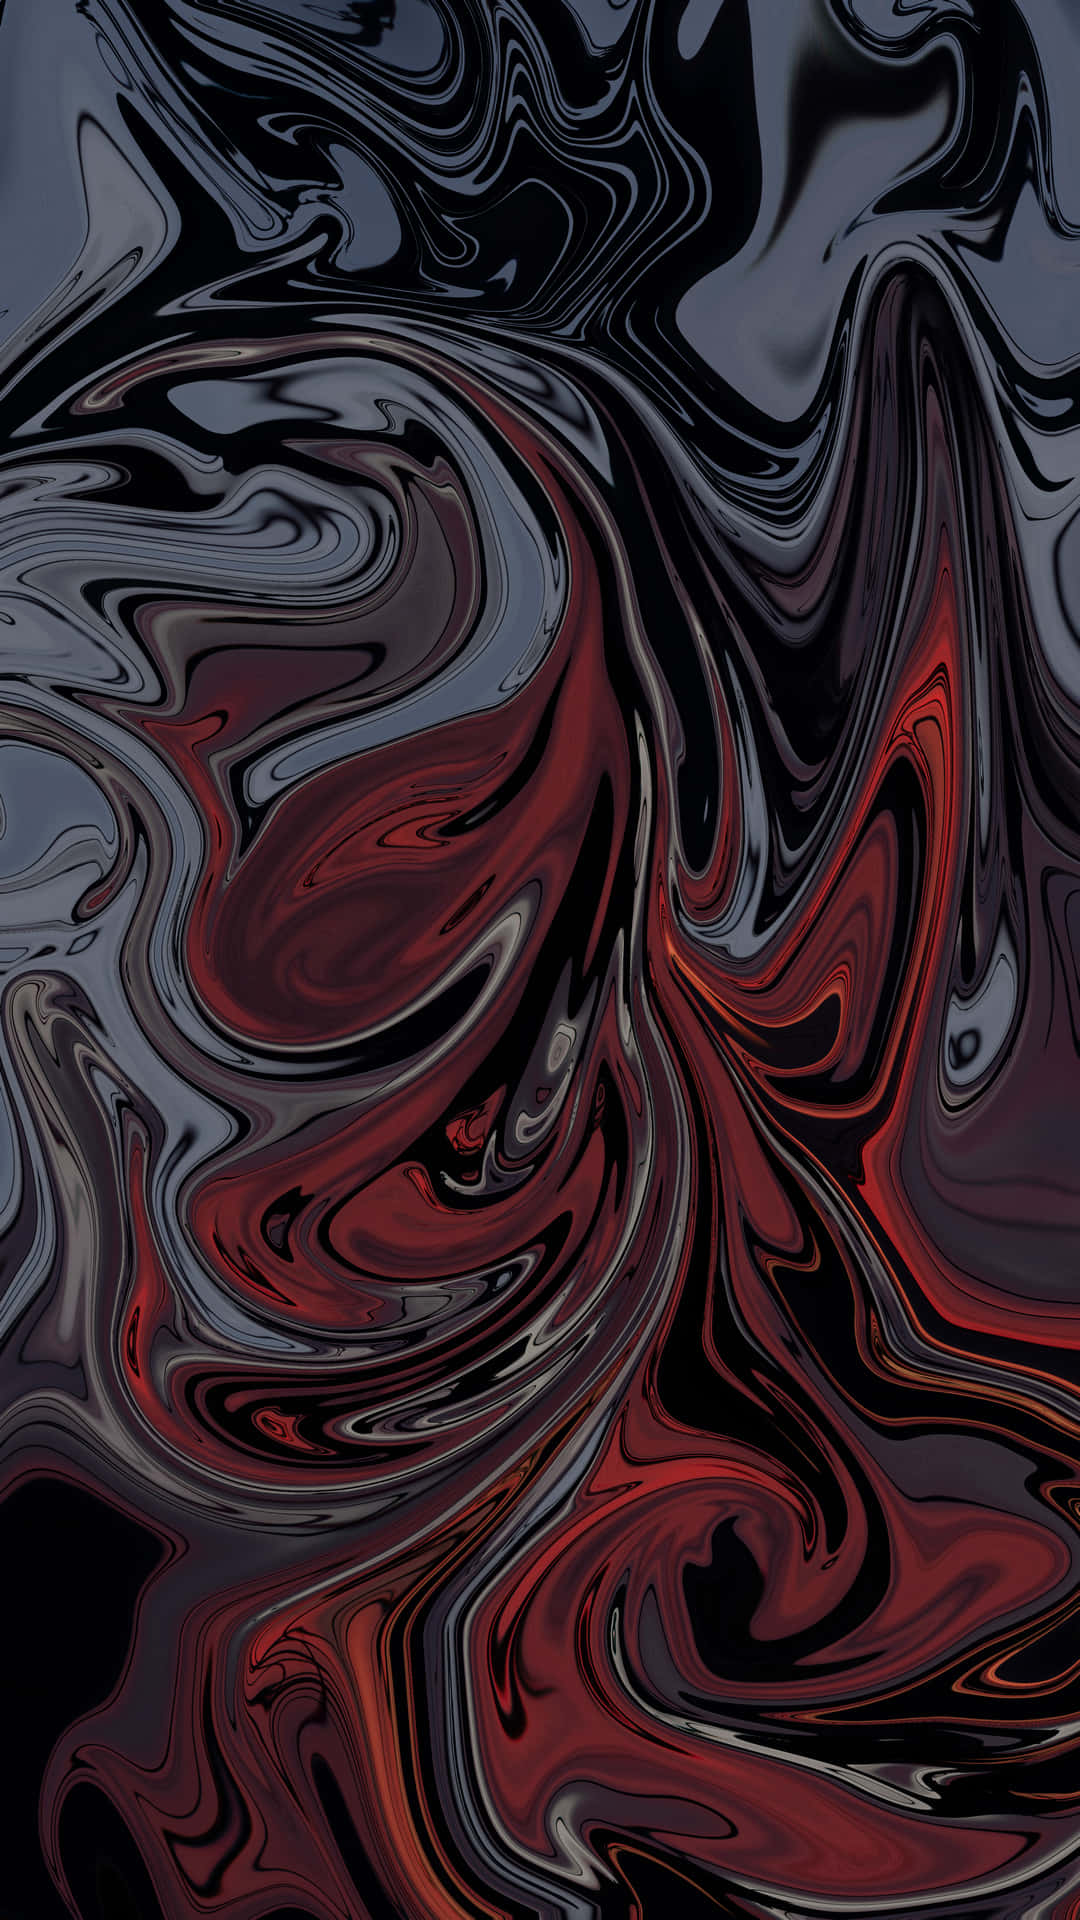 A Red And Black Swirling Liquid Wallpaper